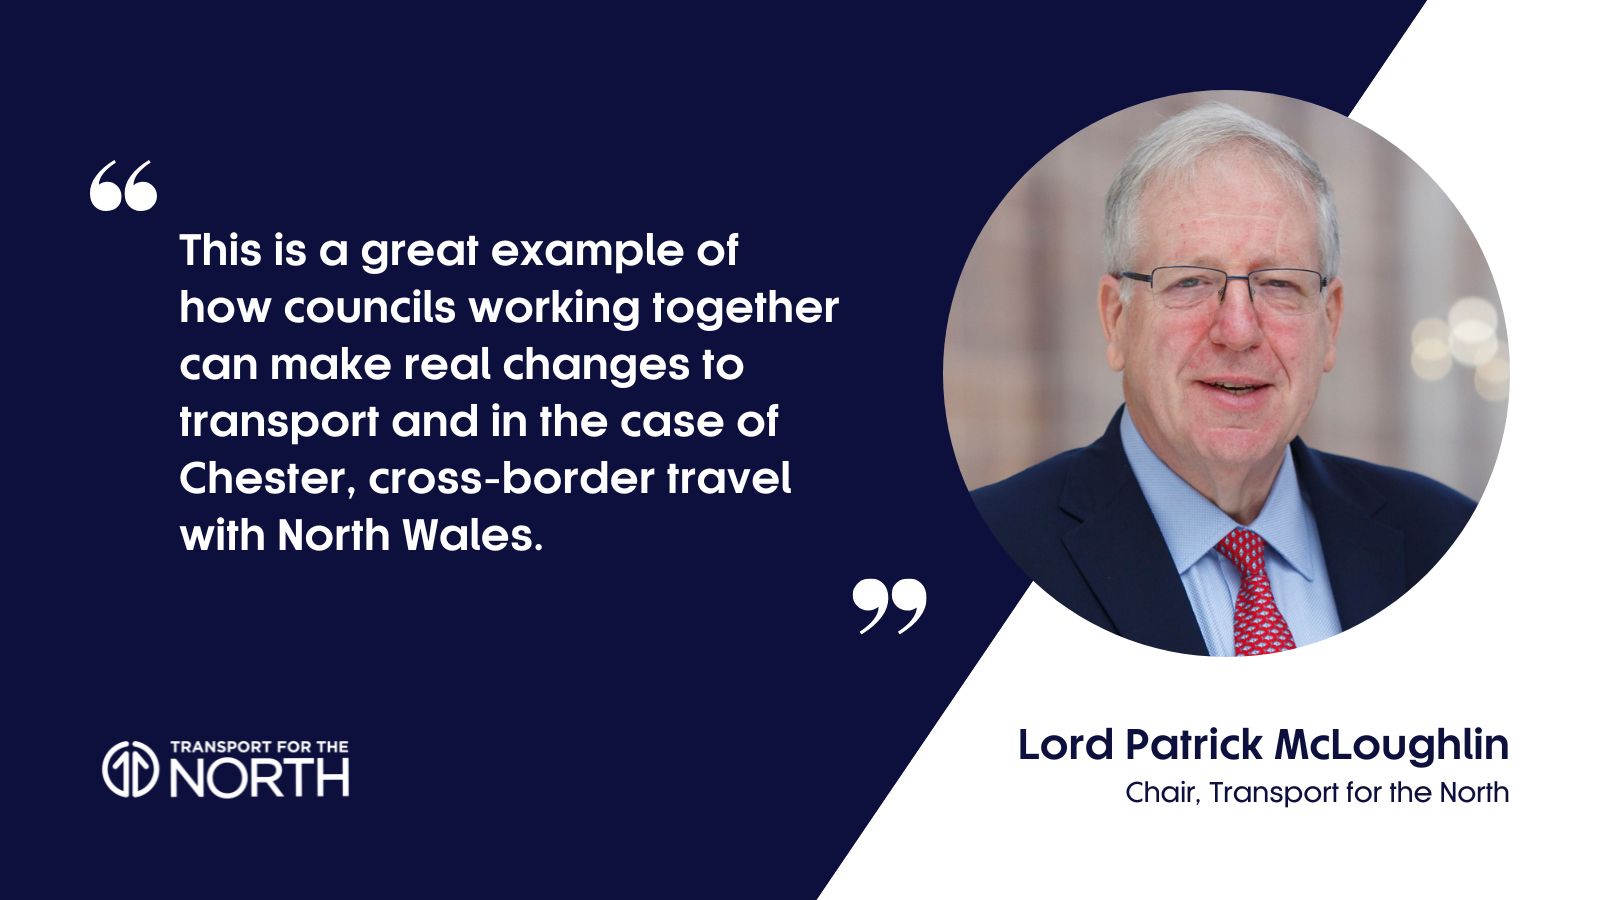 Lord Patrick McLoughlin on visiting Cheshire West and Chester Council